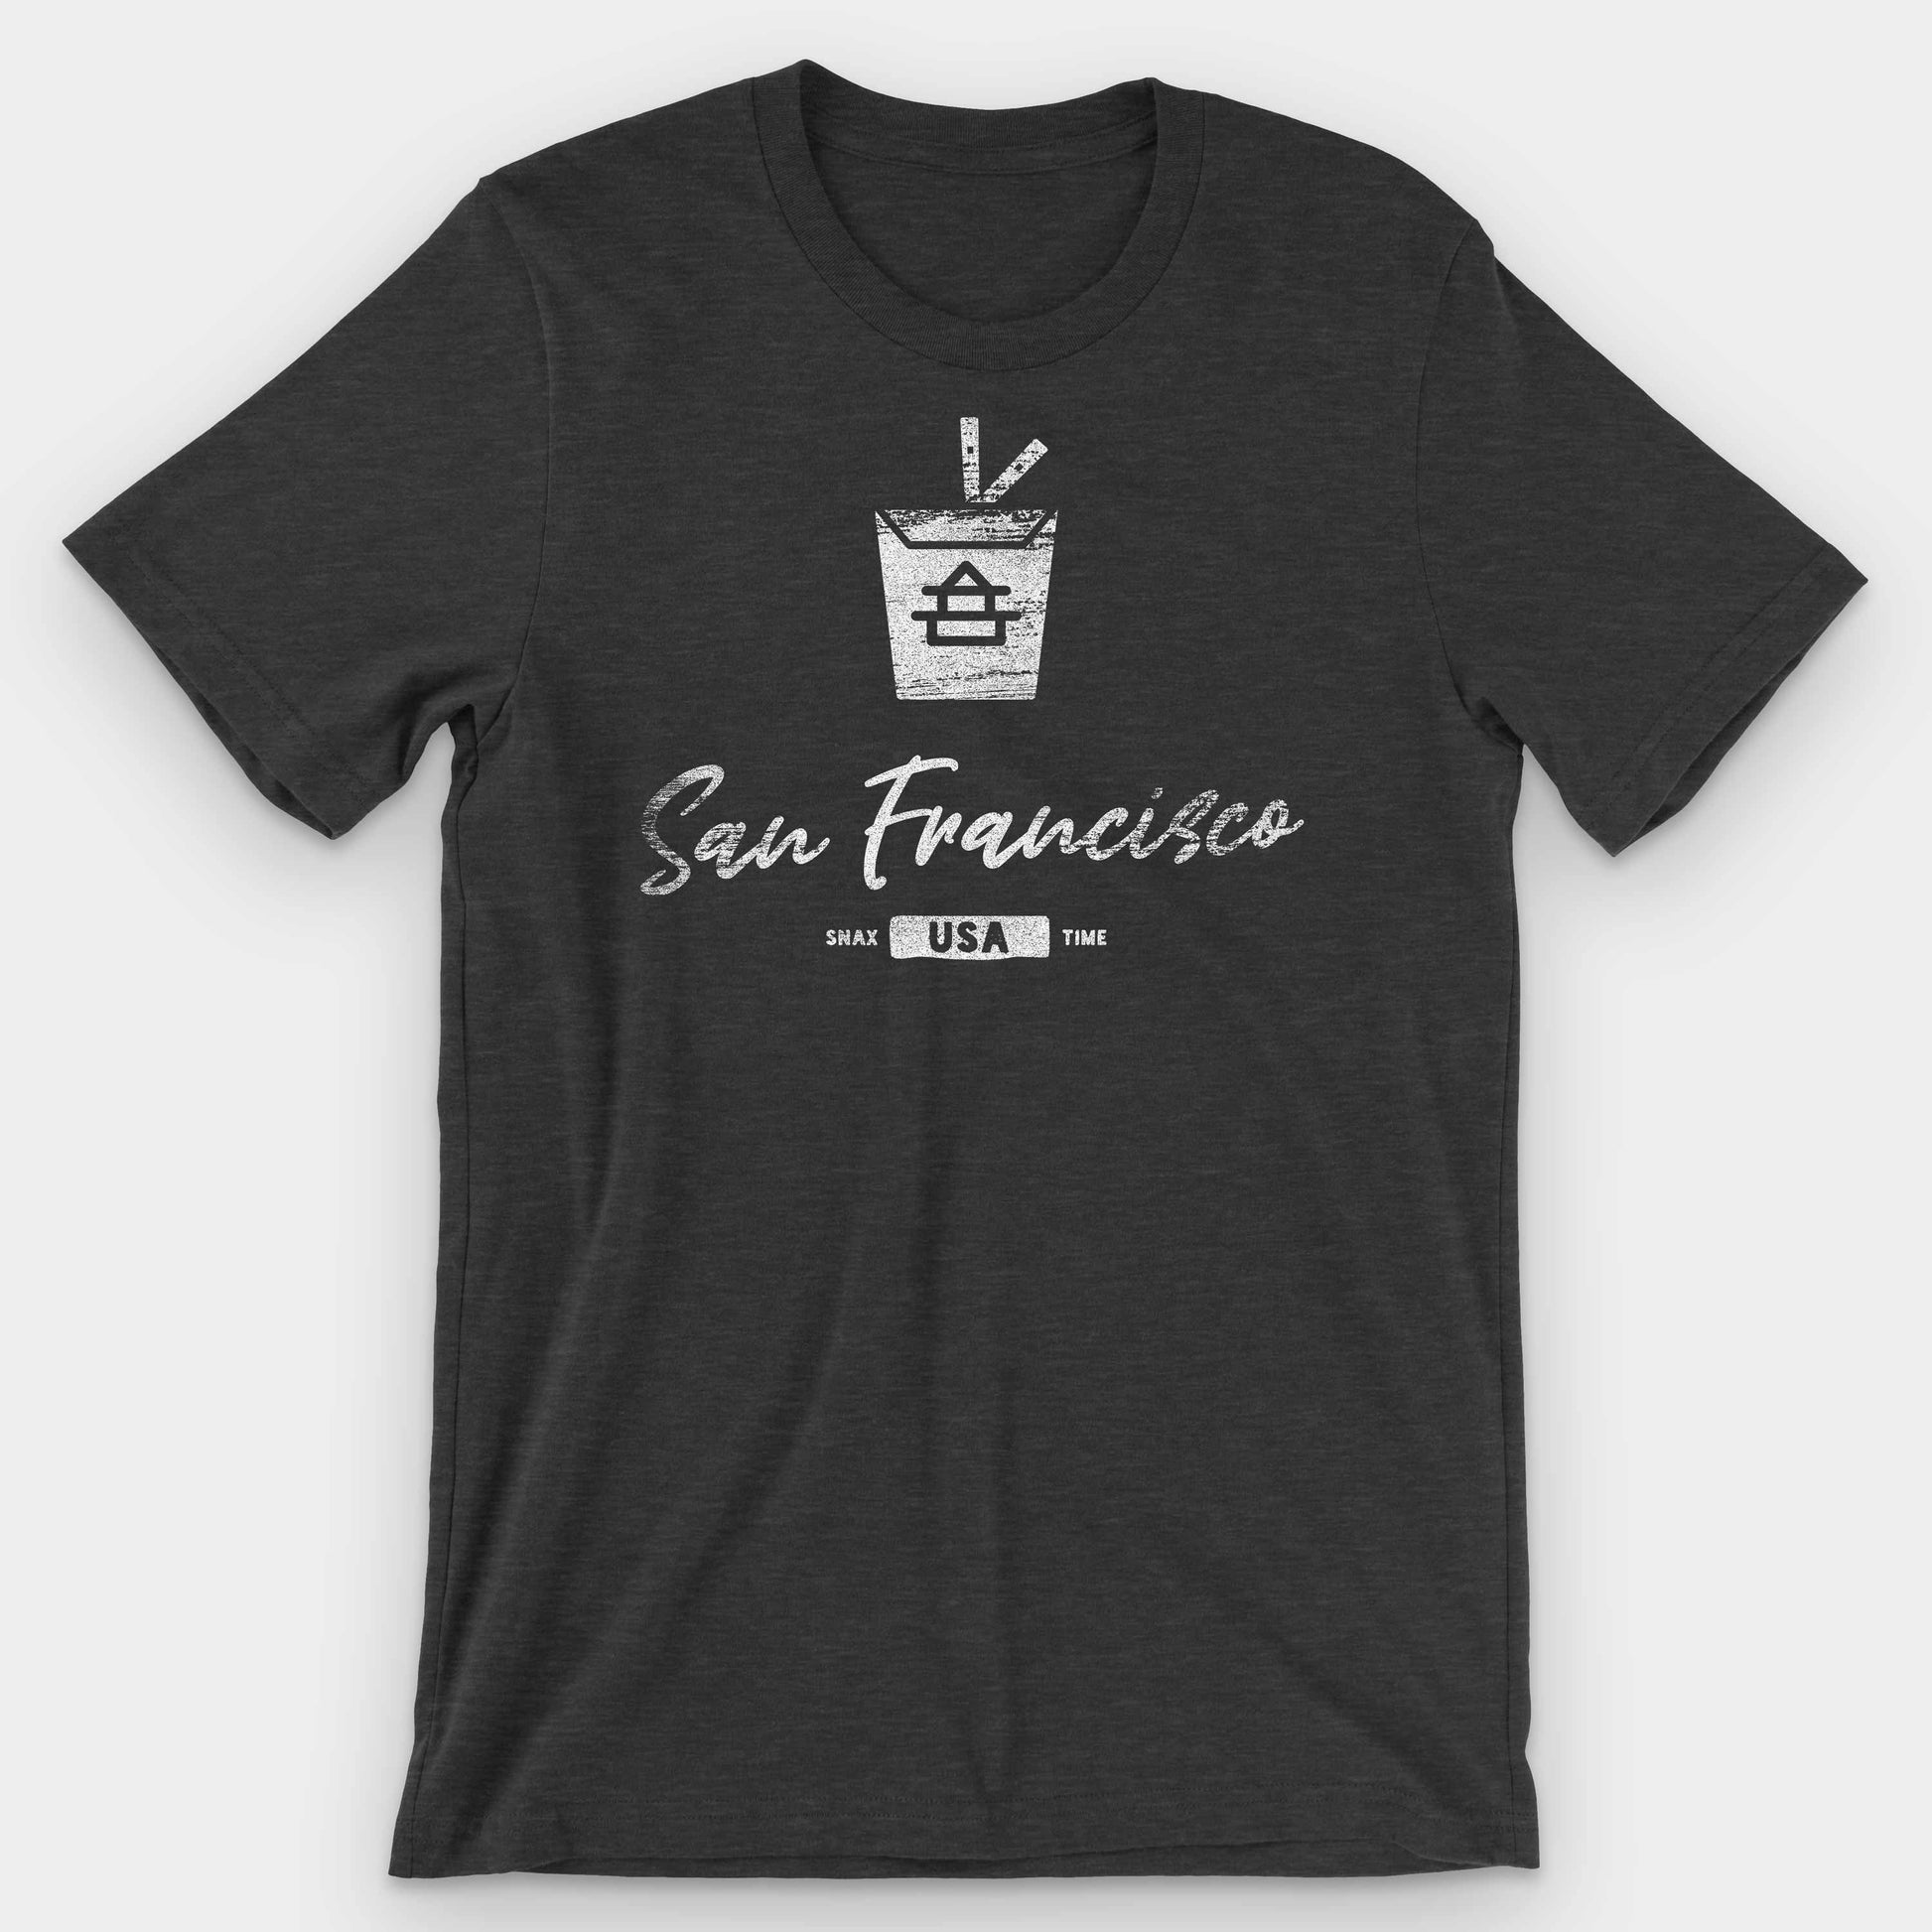 Black Heather San Francisco Chinese Takeout Graphic T-Shirt by Snaxtime